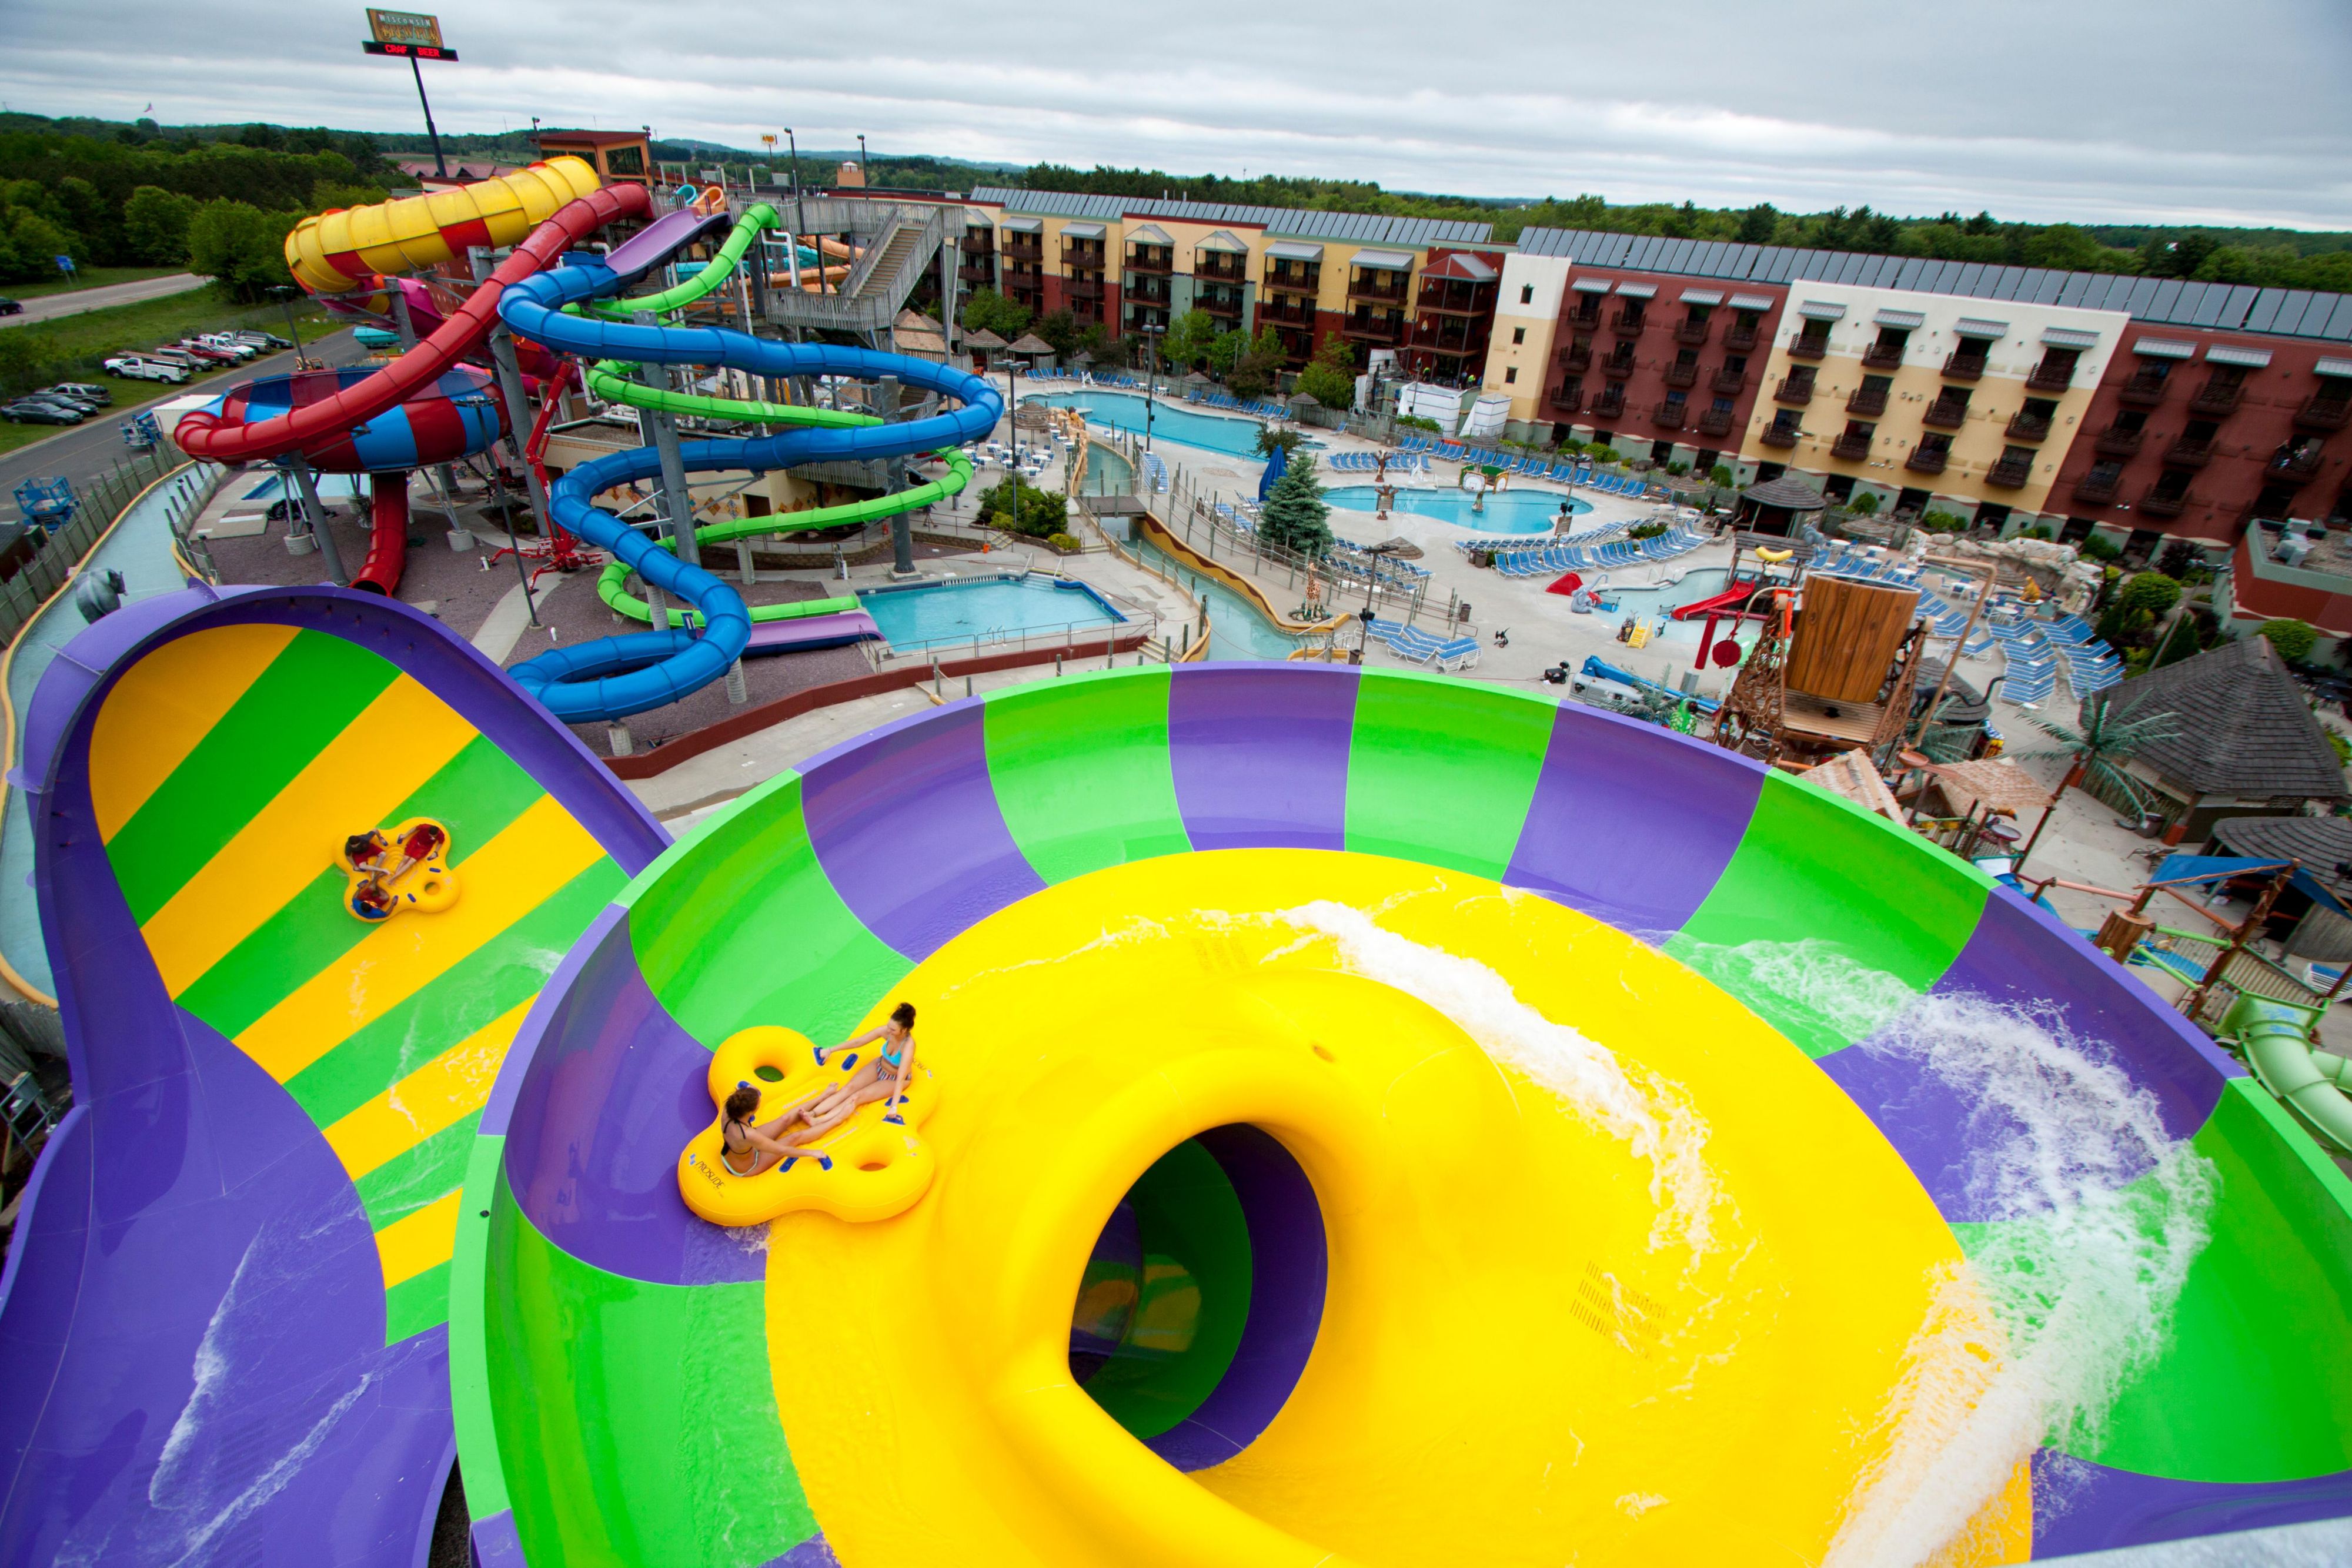 choose the Kalahari Waterpark Package, that includes 2 One Day Passes. Additional passes can be added at a discounted rate for registered guests.  